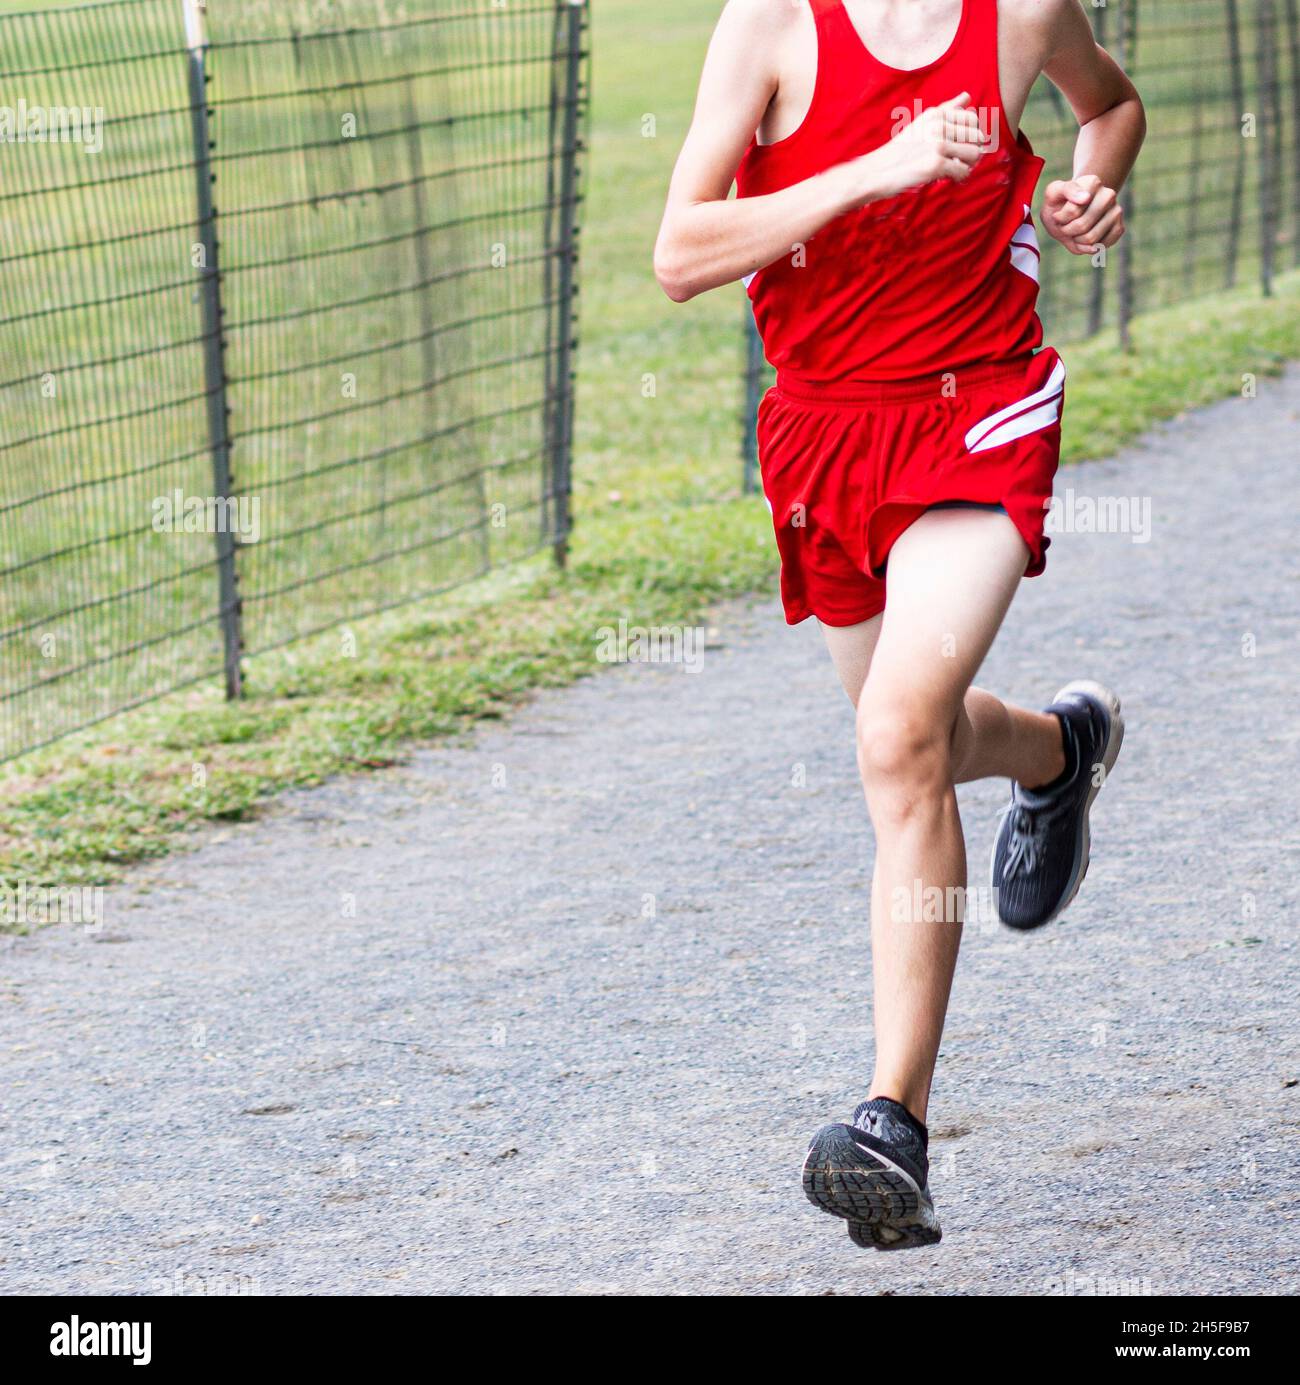 A high school cross country runner is finishing a race at Van Cortlandt park in the bronx on a gravel path next to a fence. Stock Photo